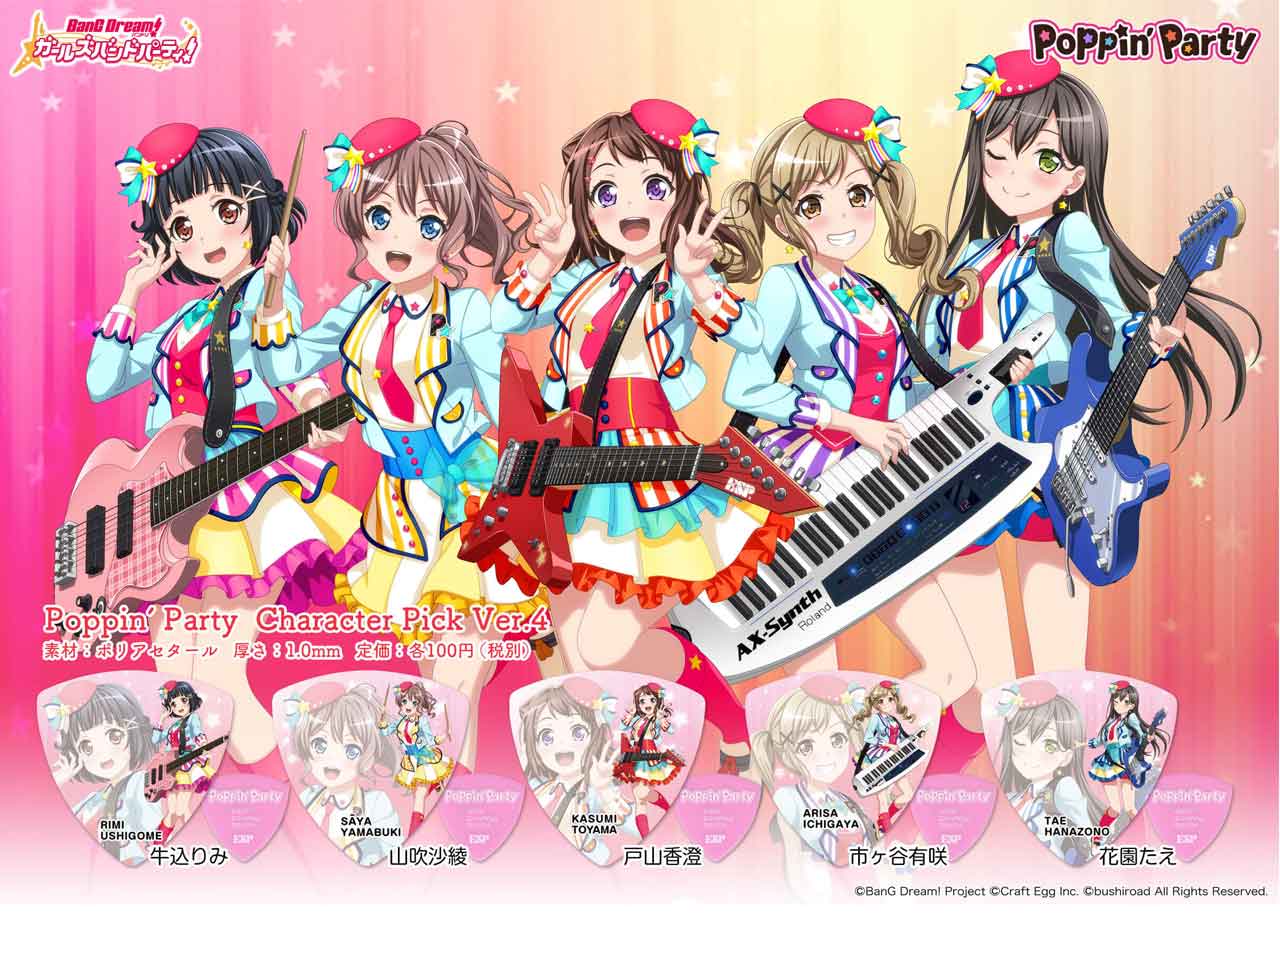 【ESP×BanG Dream!コラボピック】Poppin’Party Character Pick Ver.4 "牛込りみ"10枚セット（GBP Rimi Poppin Party 4）